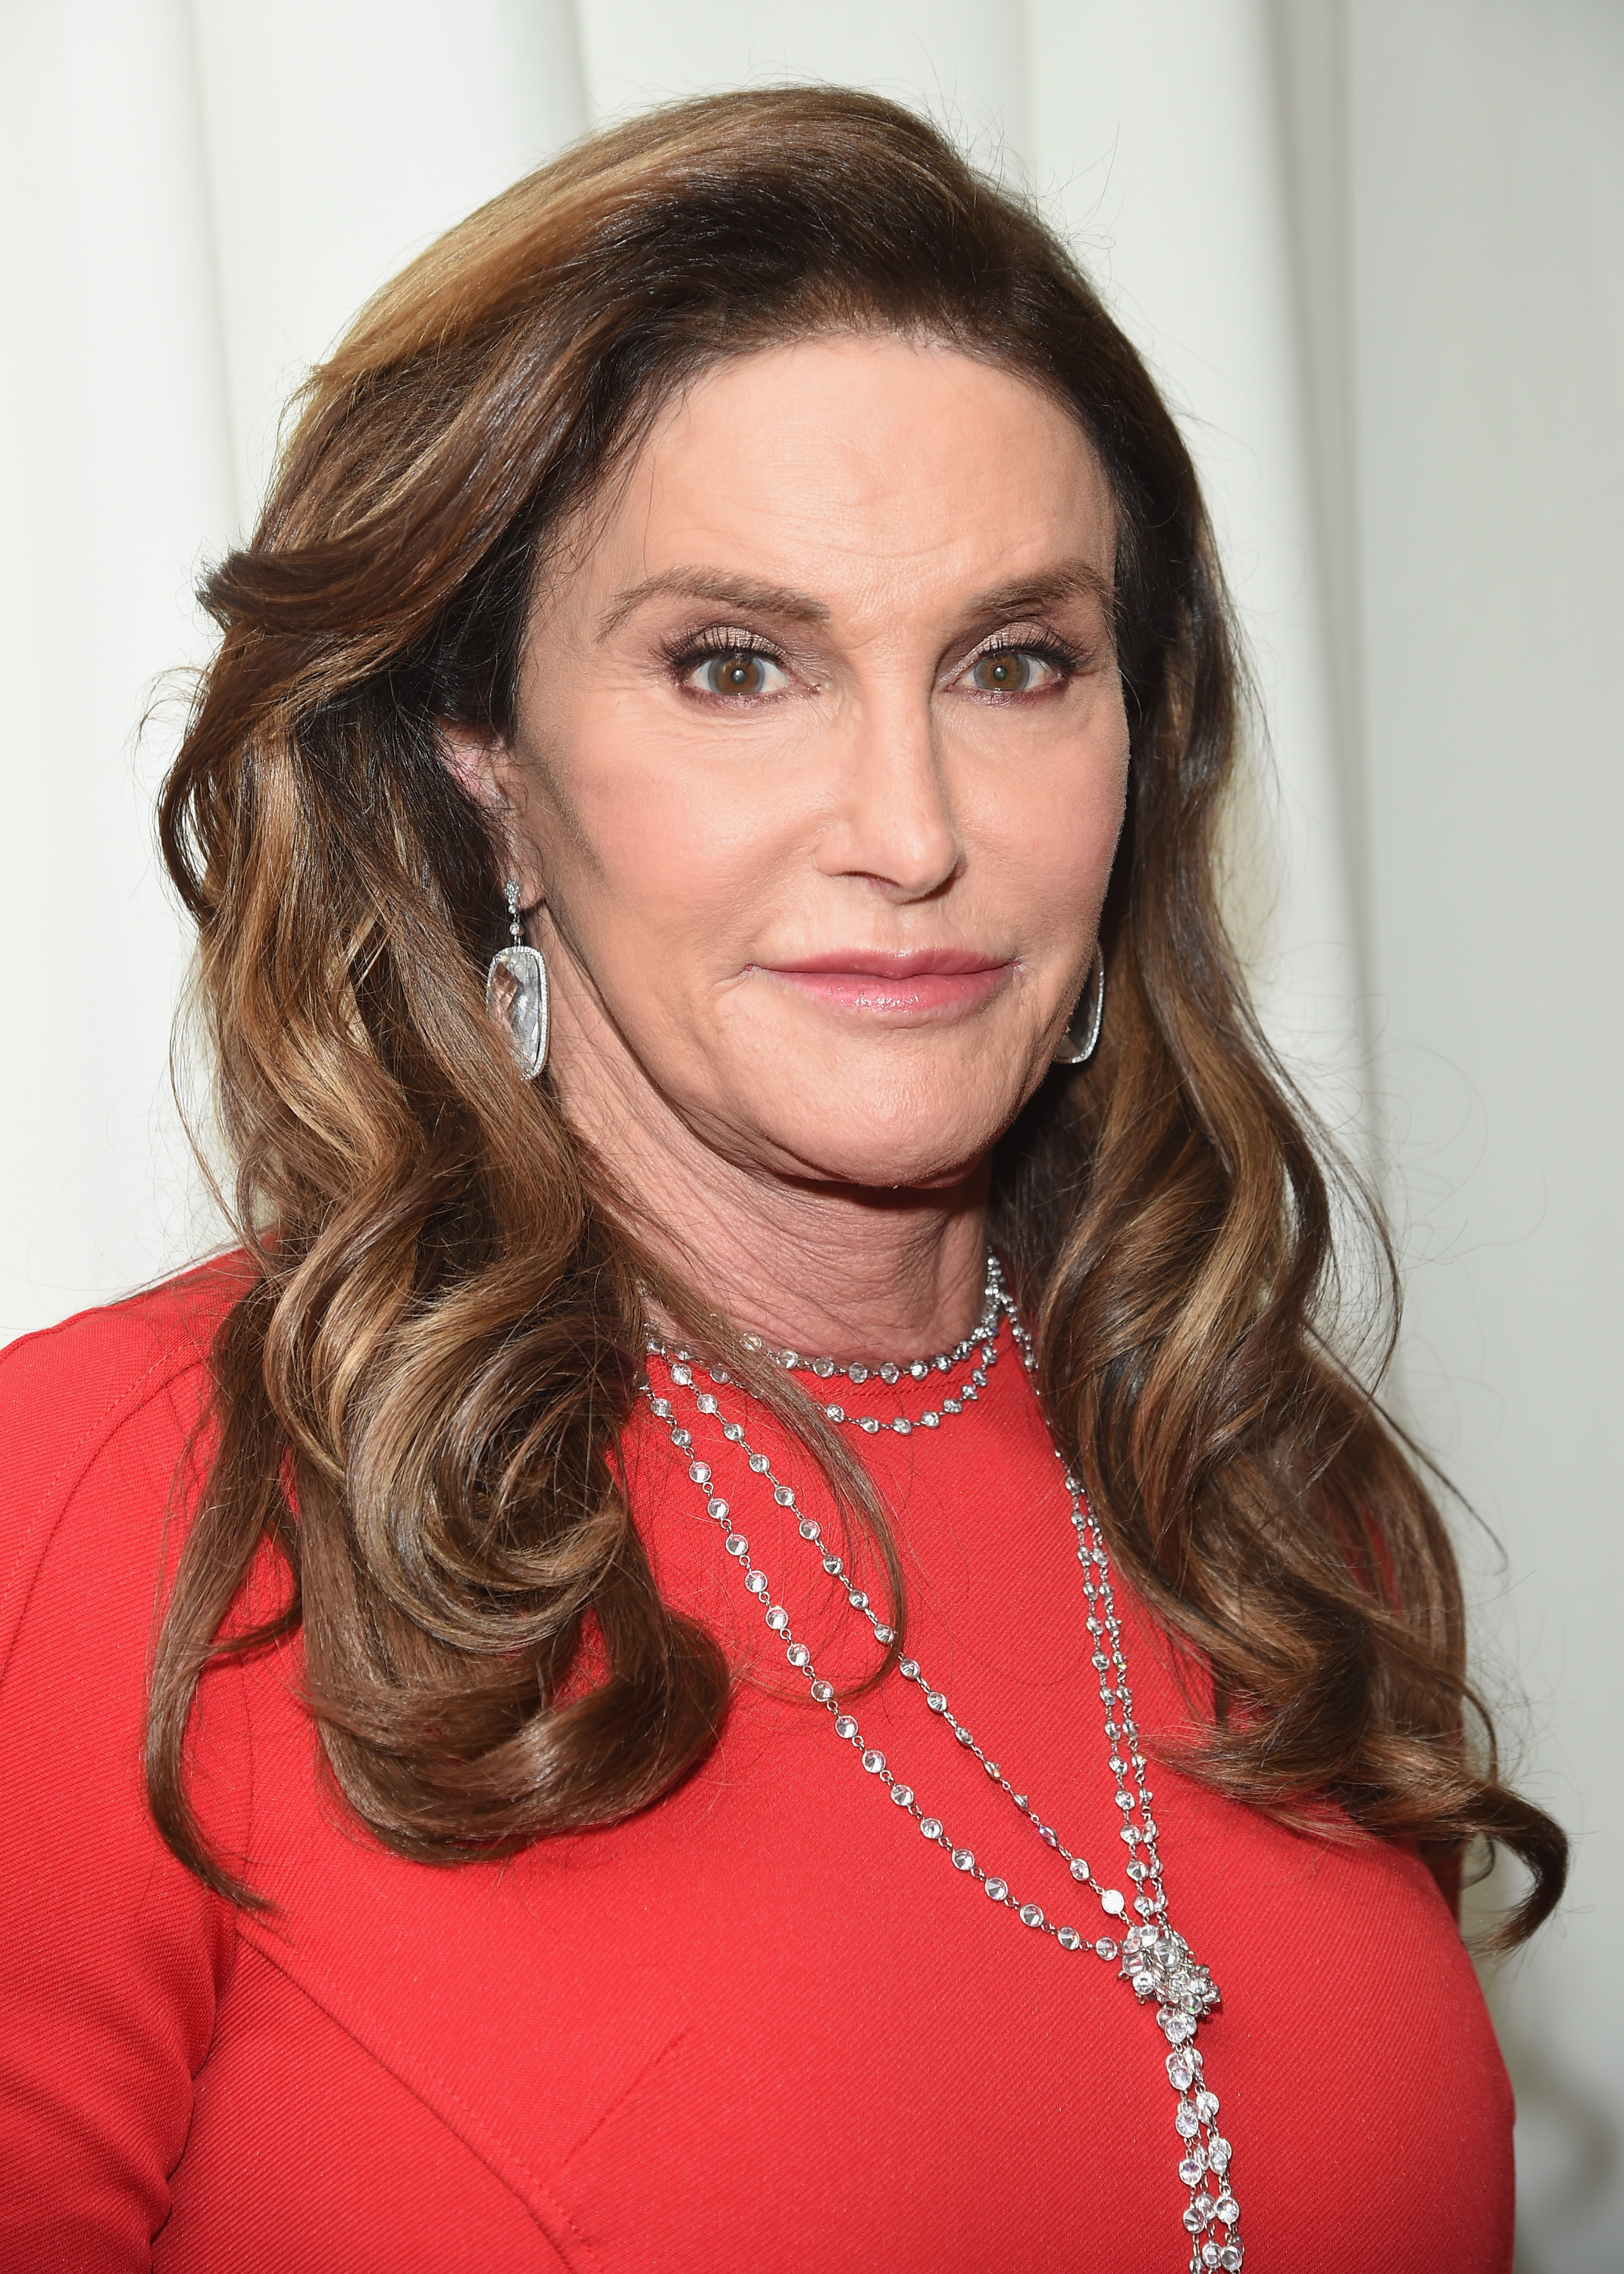 Caitlyn Jenner at the 24th Annual Elton John AIDS Foundation's Oscar Viewing Party in West Hollywood, Calif. on Feb. 28, 2016.